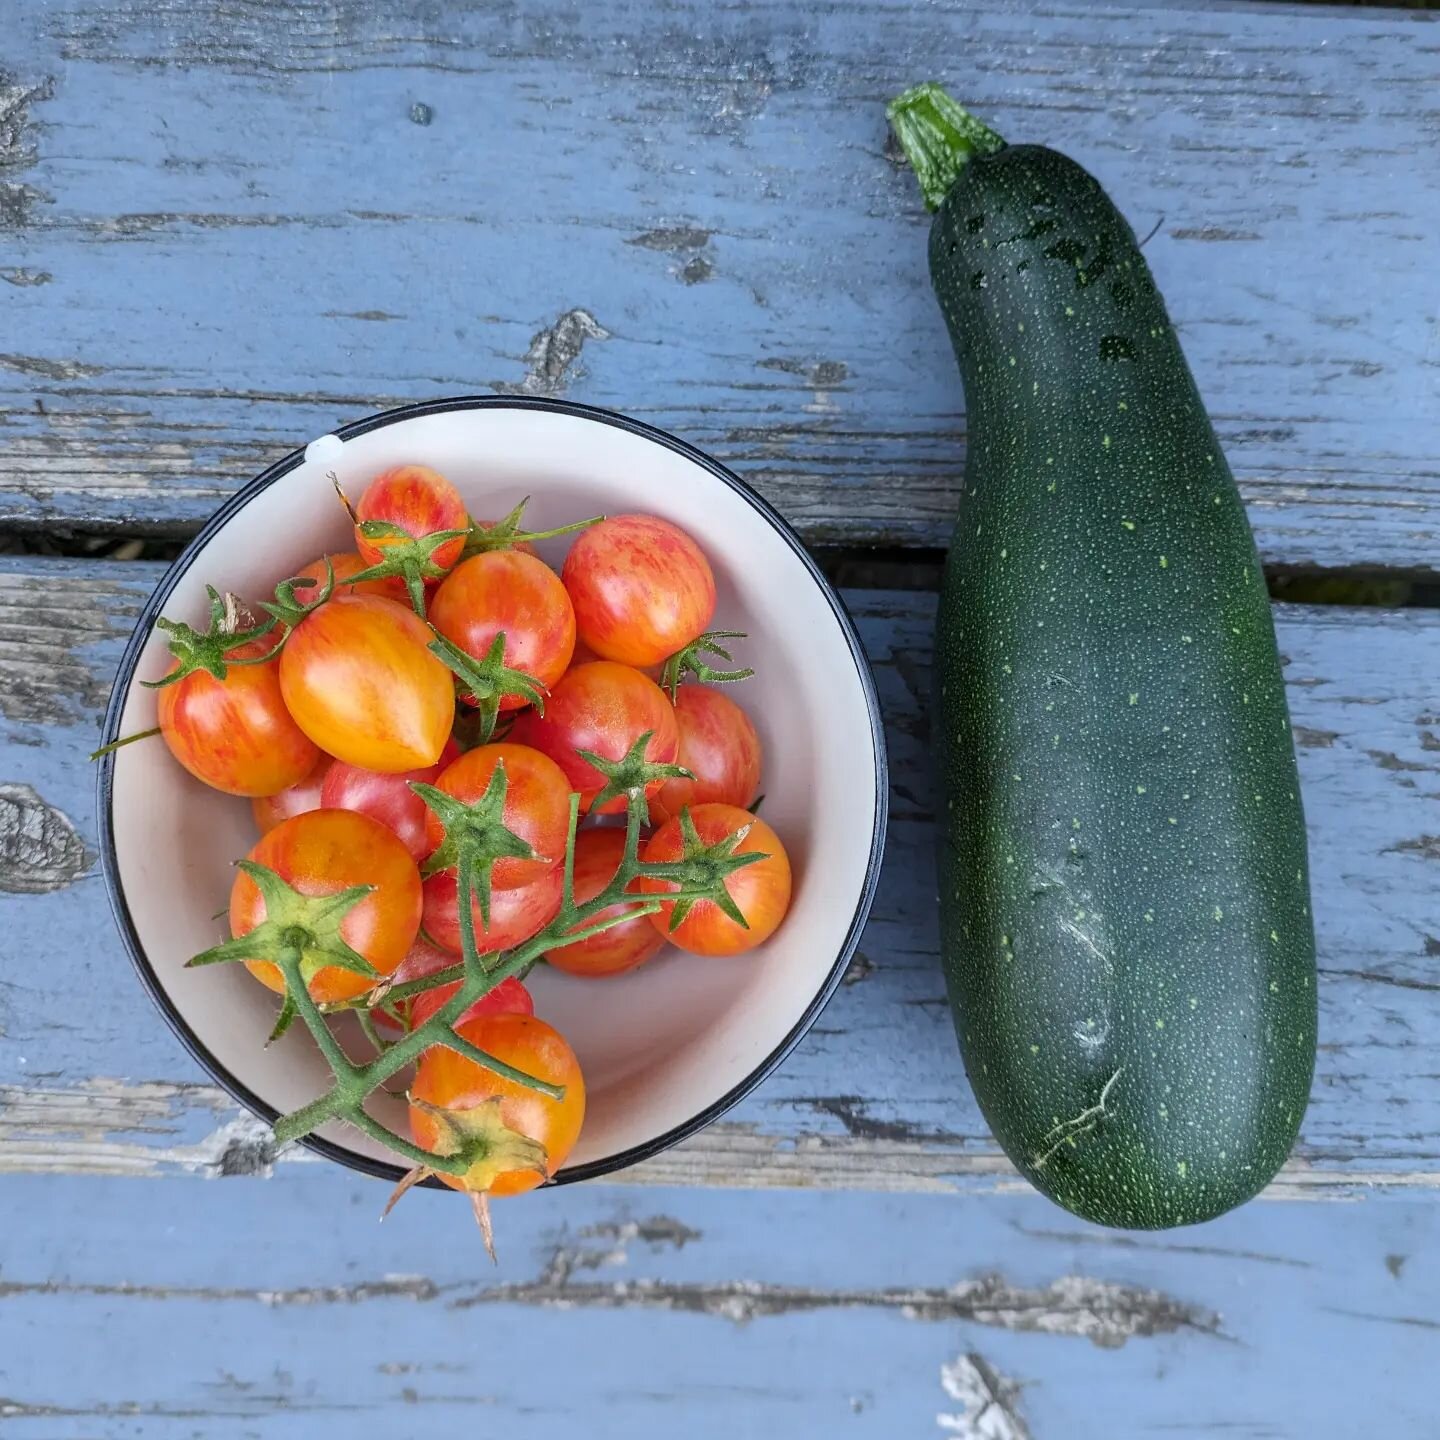 Today's harvest: a zucchini and a bowl full of sunrise bumblebee tomatoes. 🍅